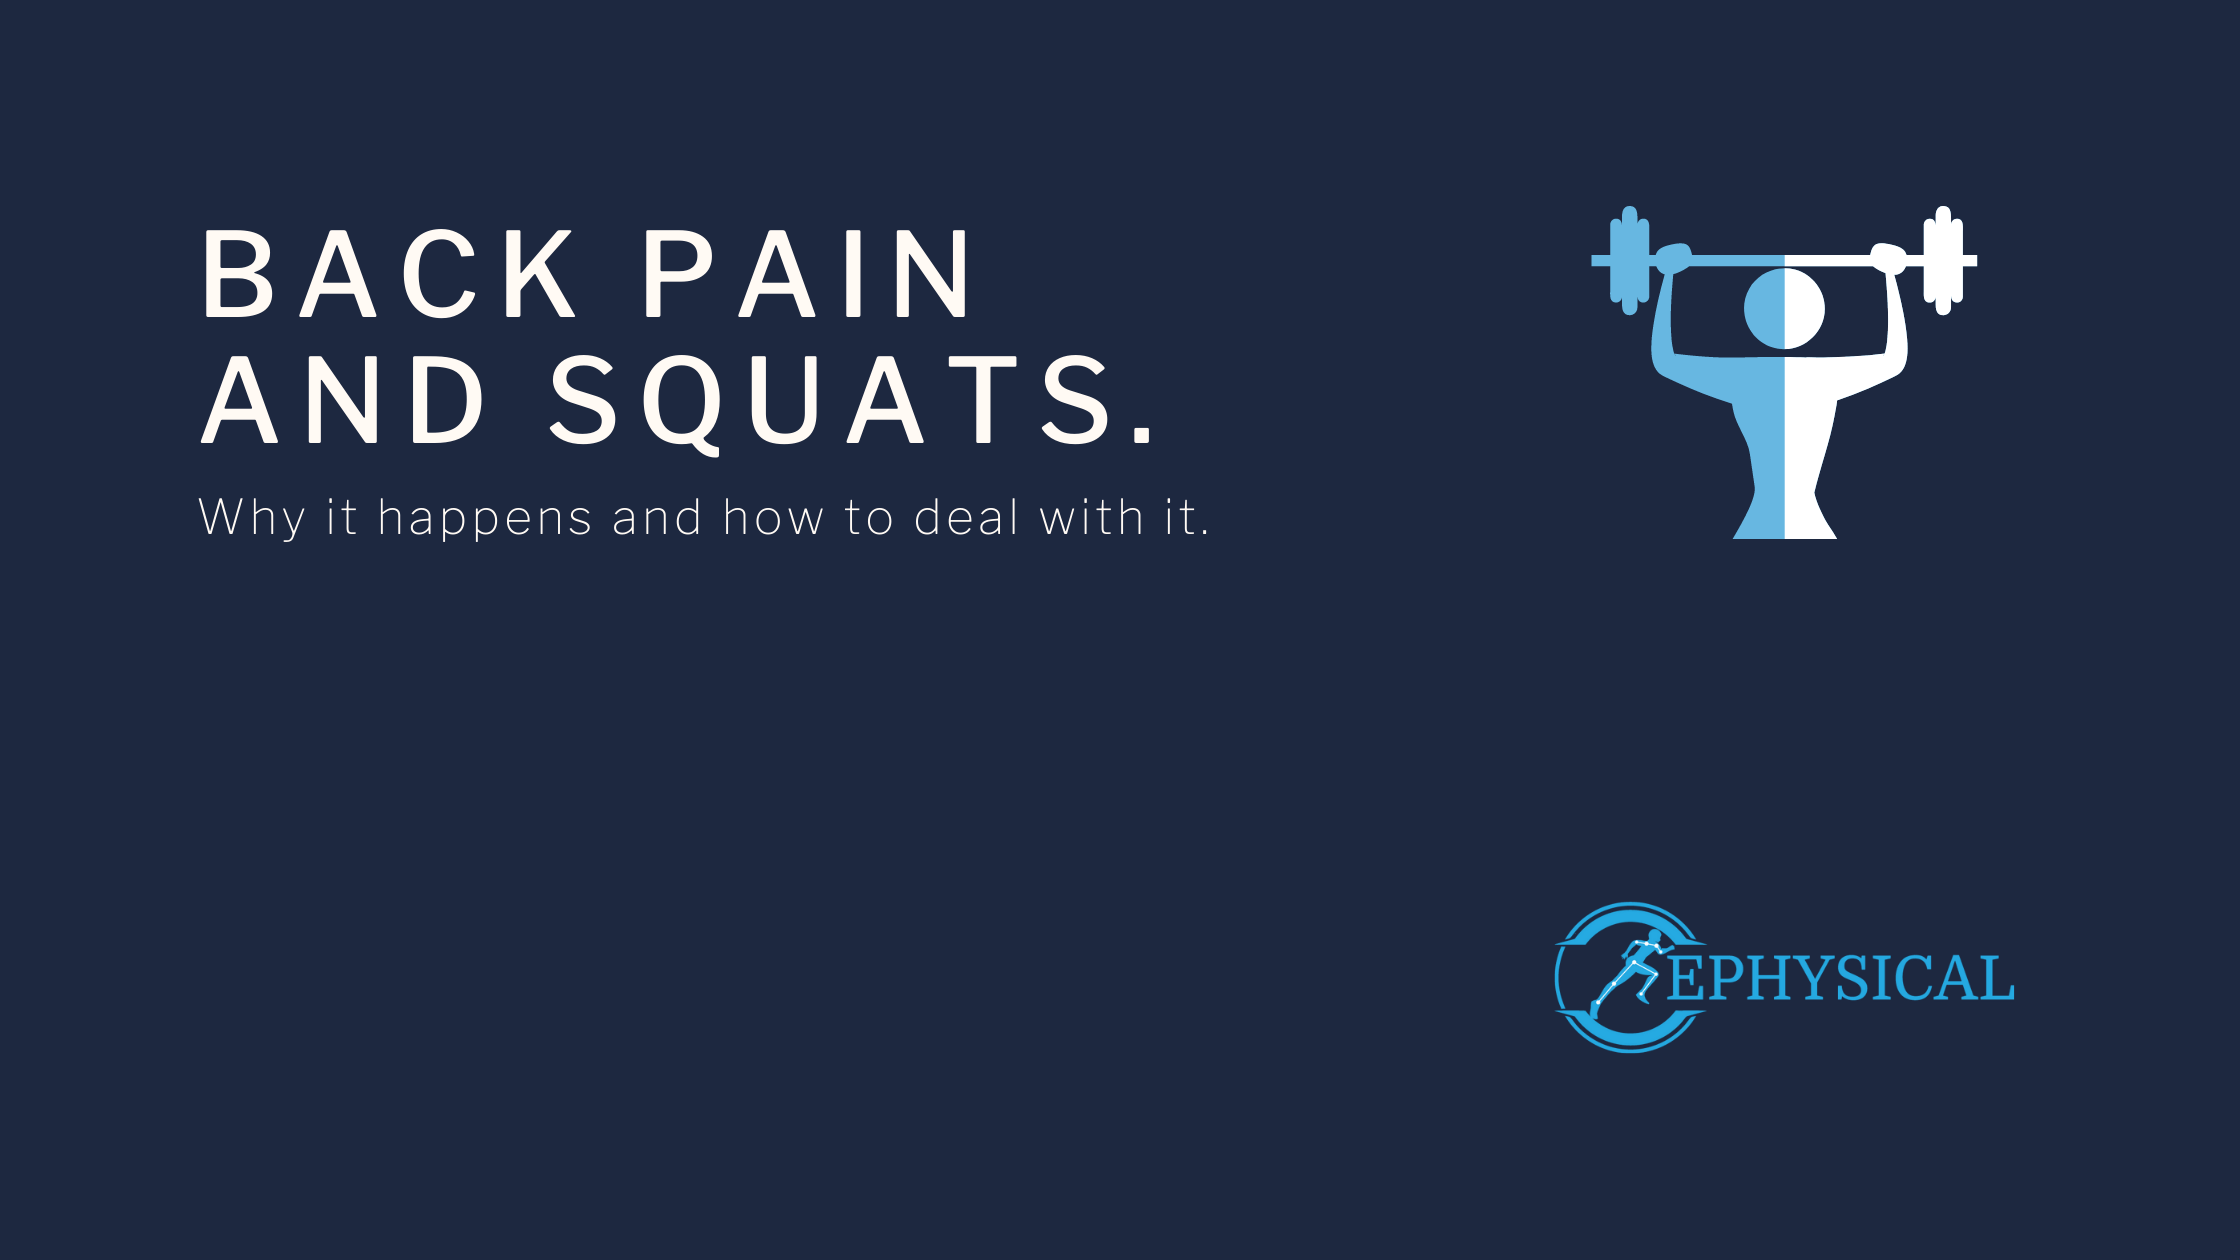 why do back hurt After squats ephysical